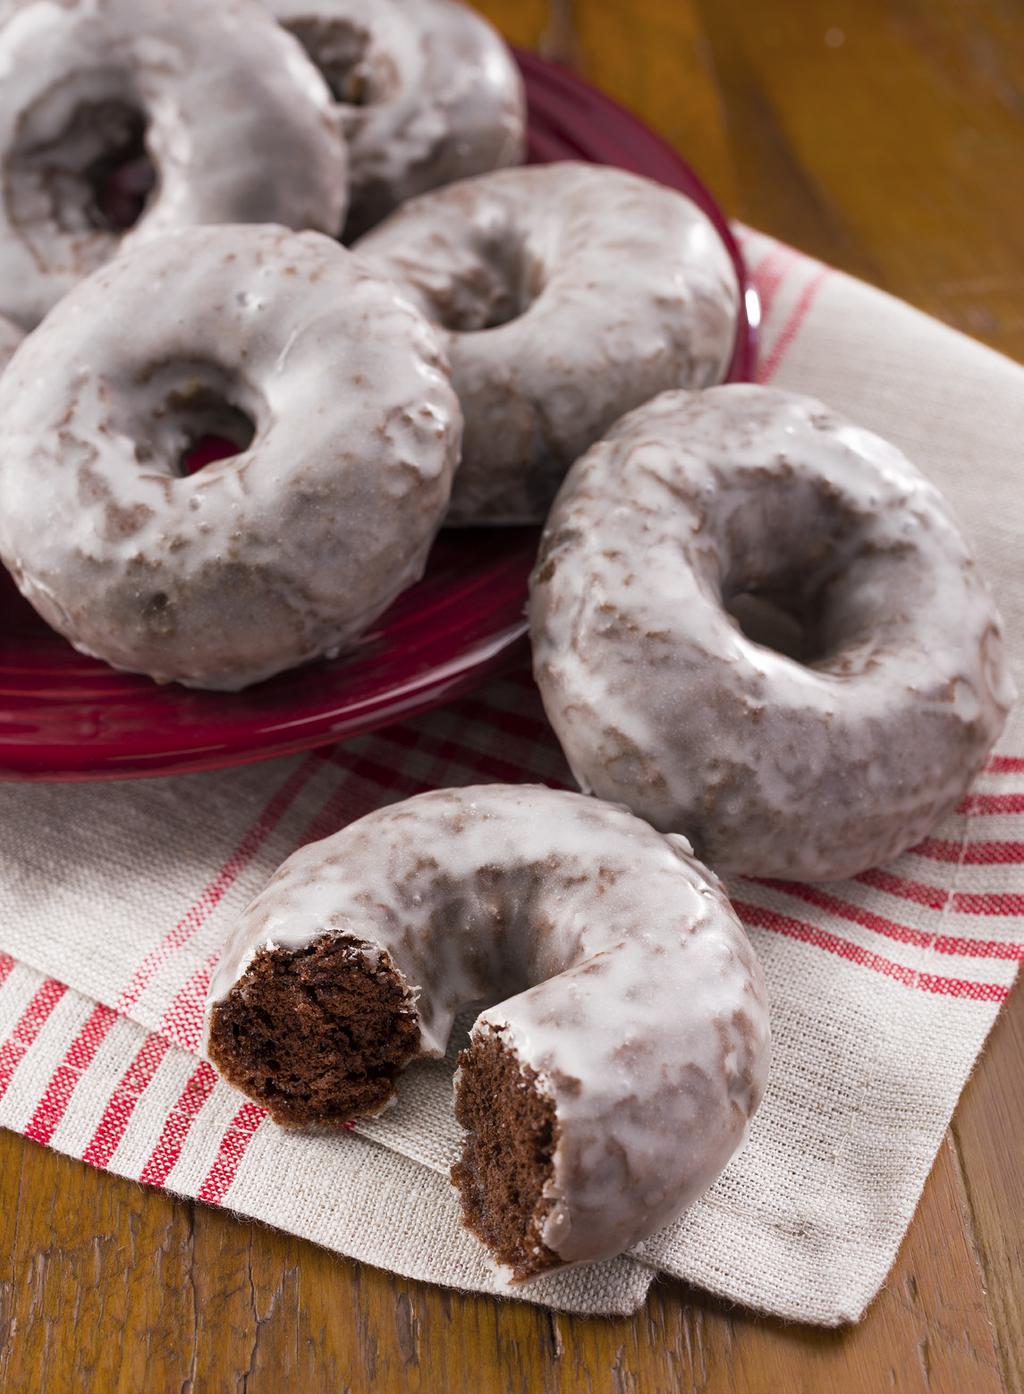 A classic chocolate doughnut covered with a sweet glaze.